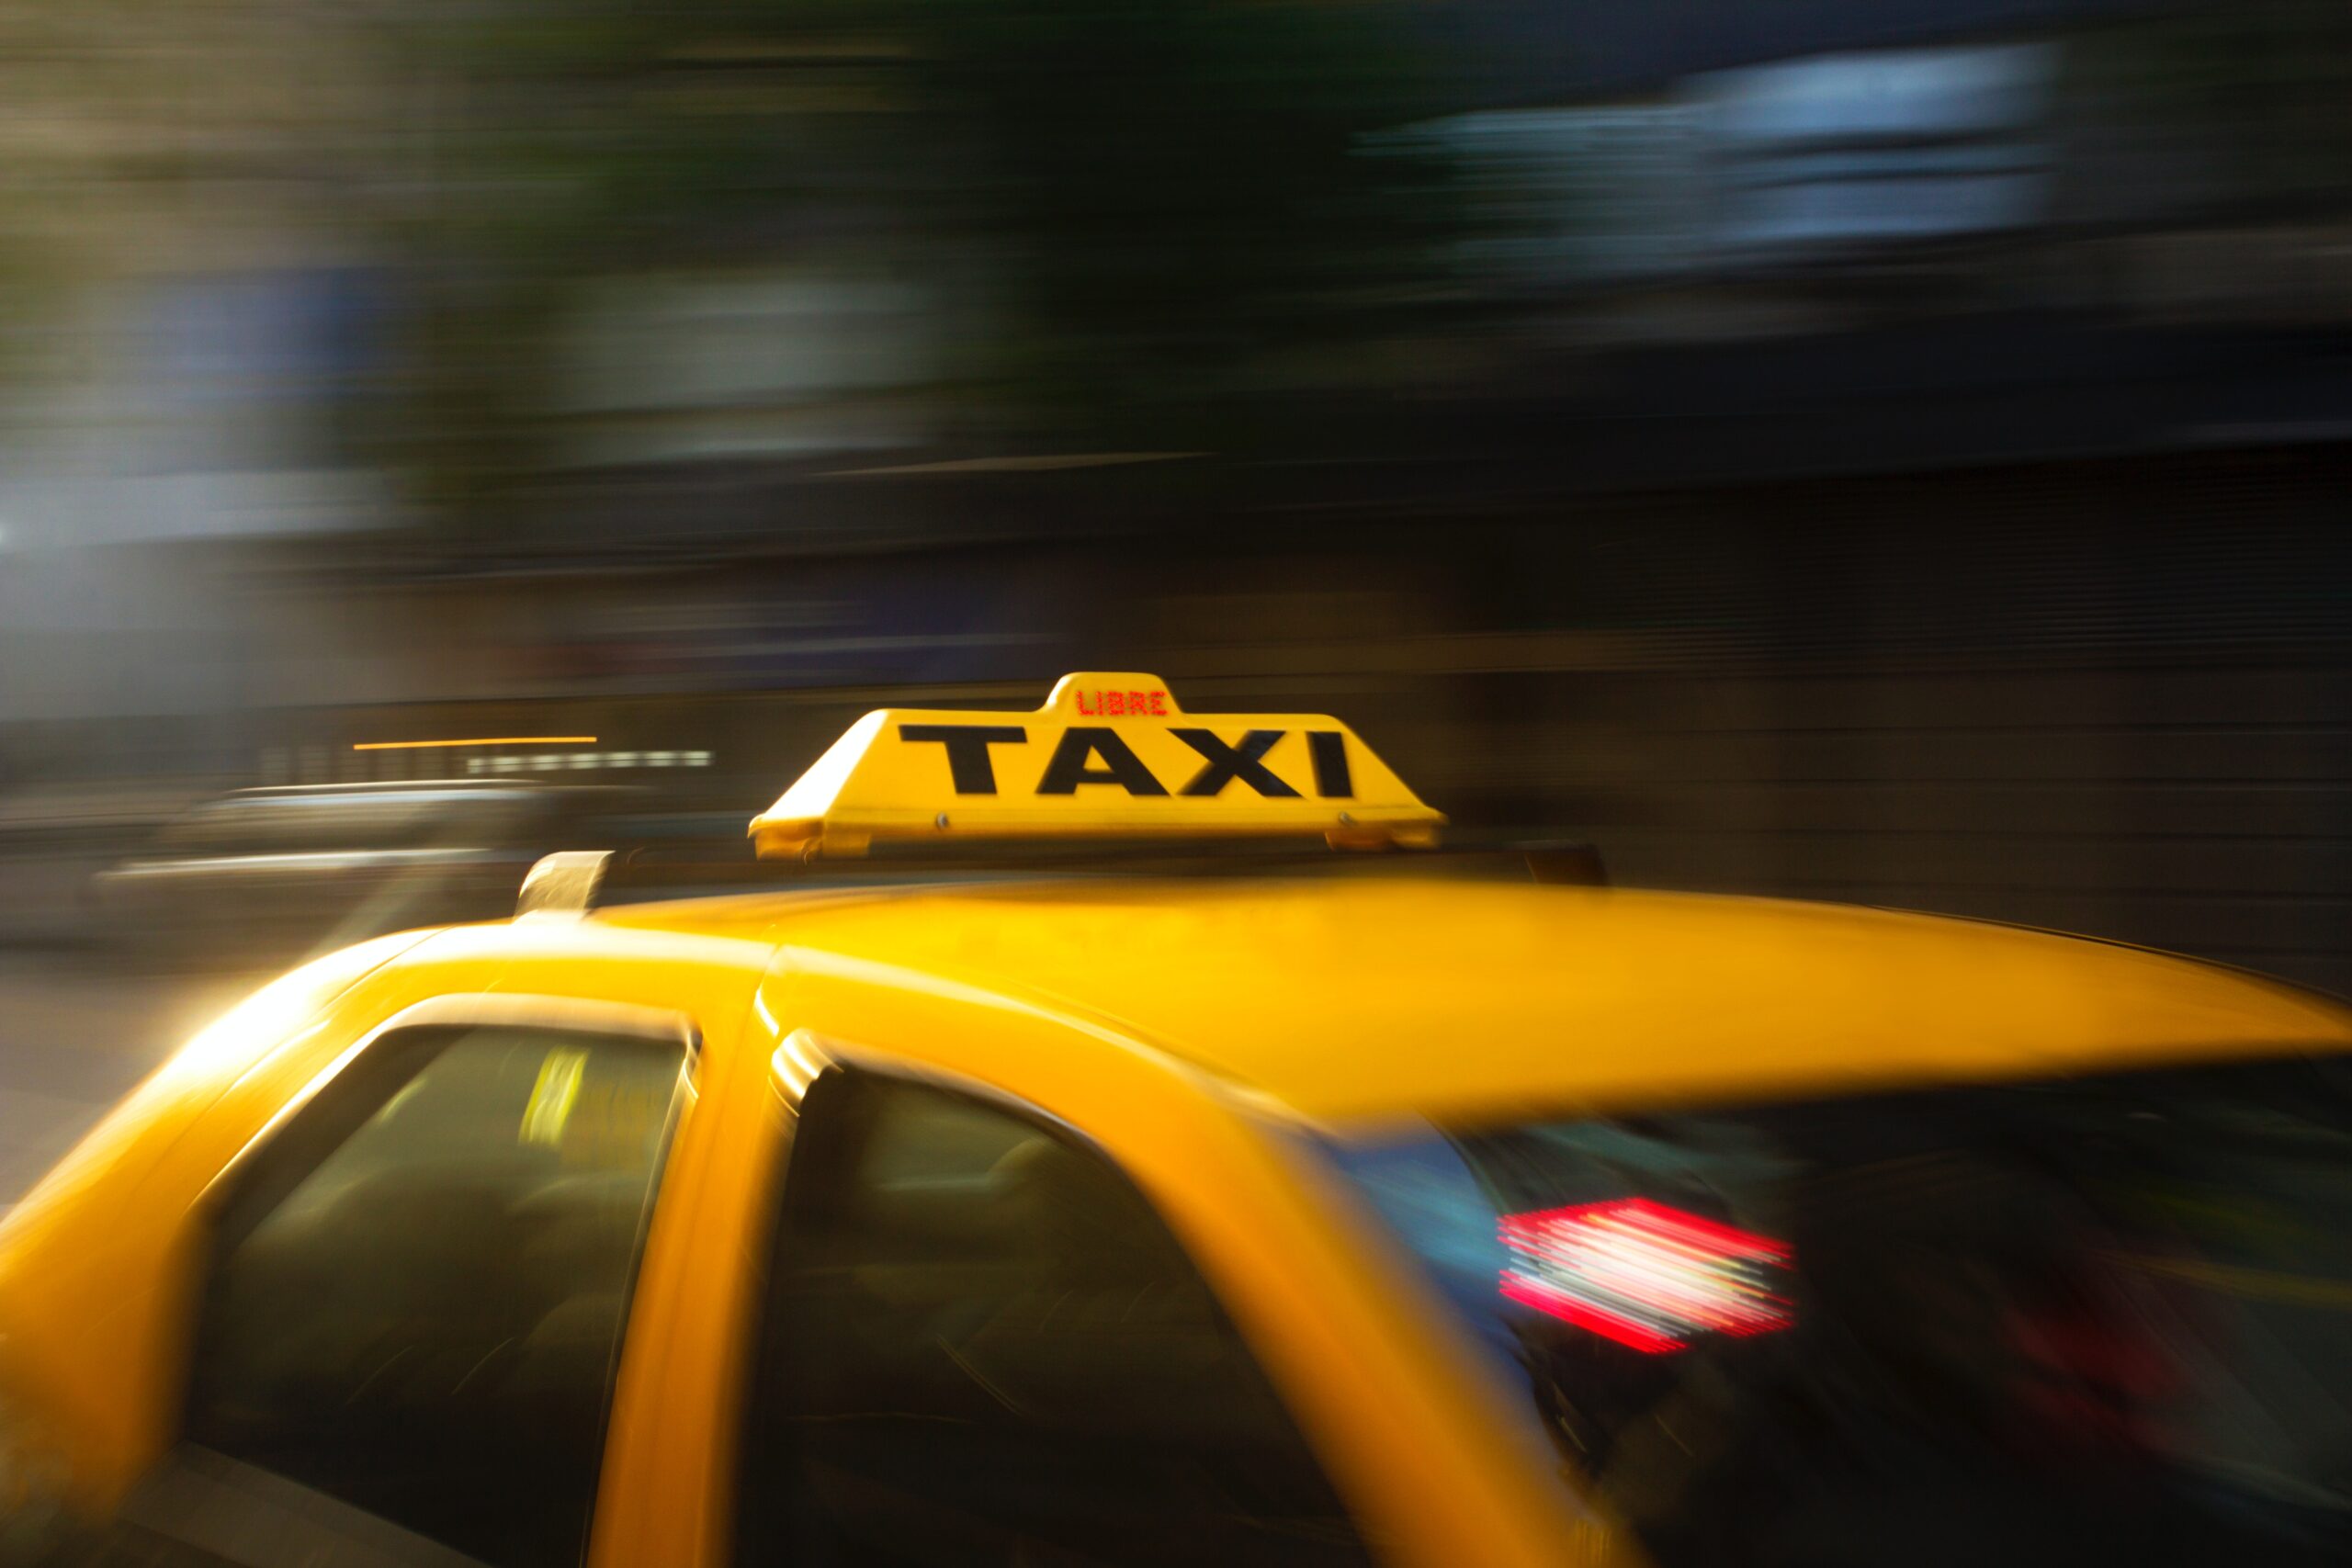 Taxis in My Area: Discovering Convenient Transportation Options